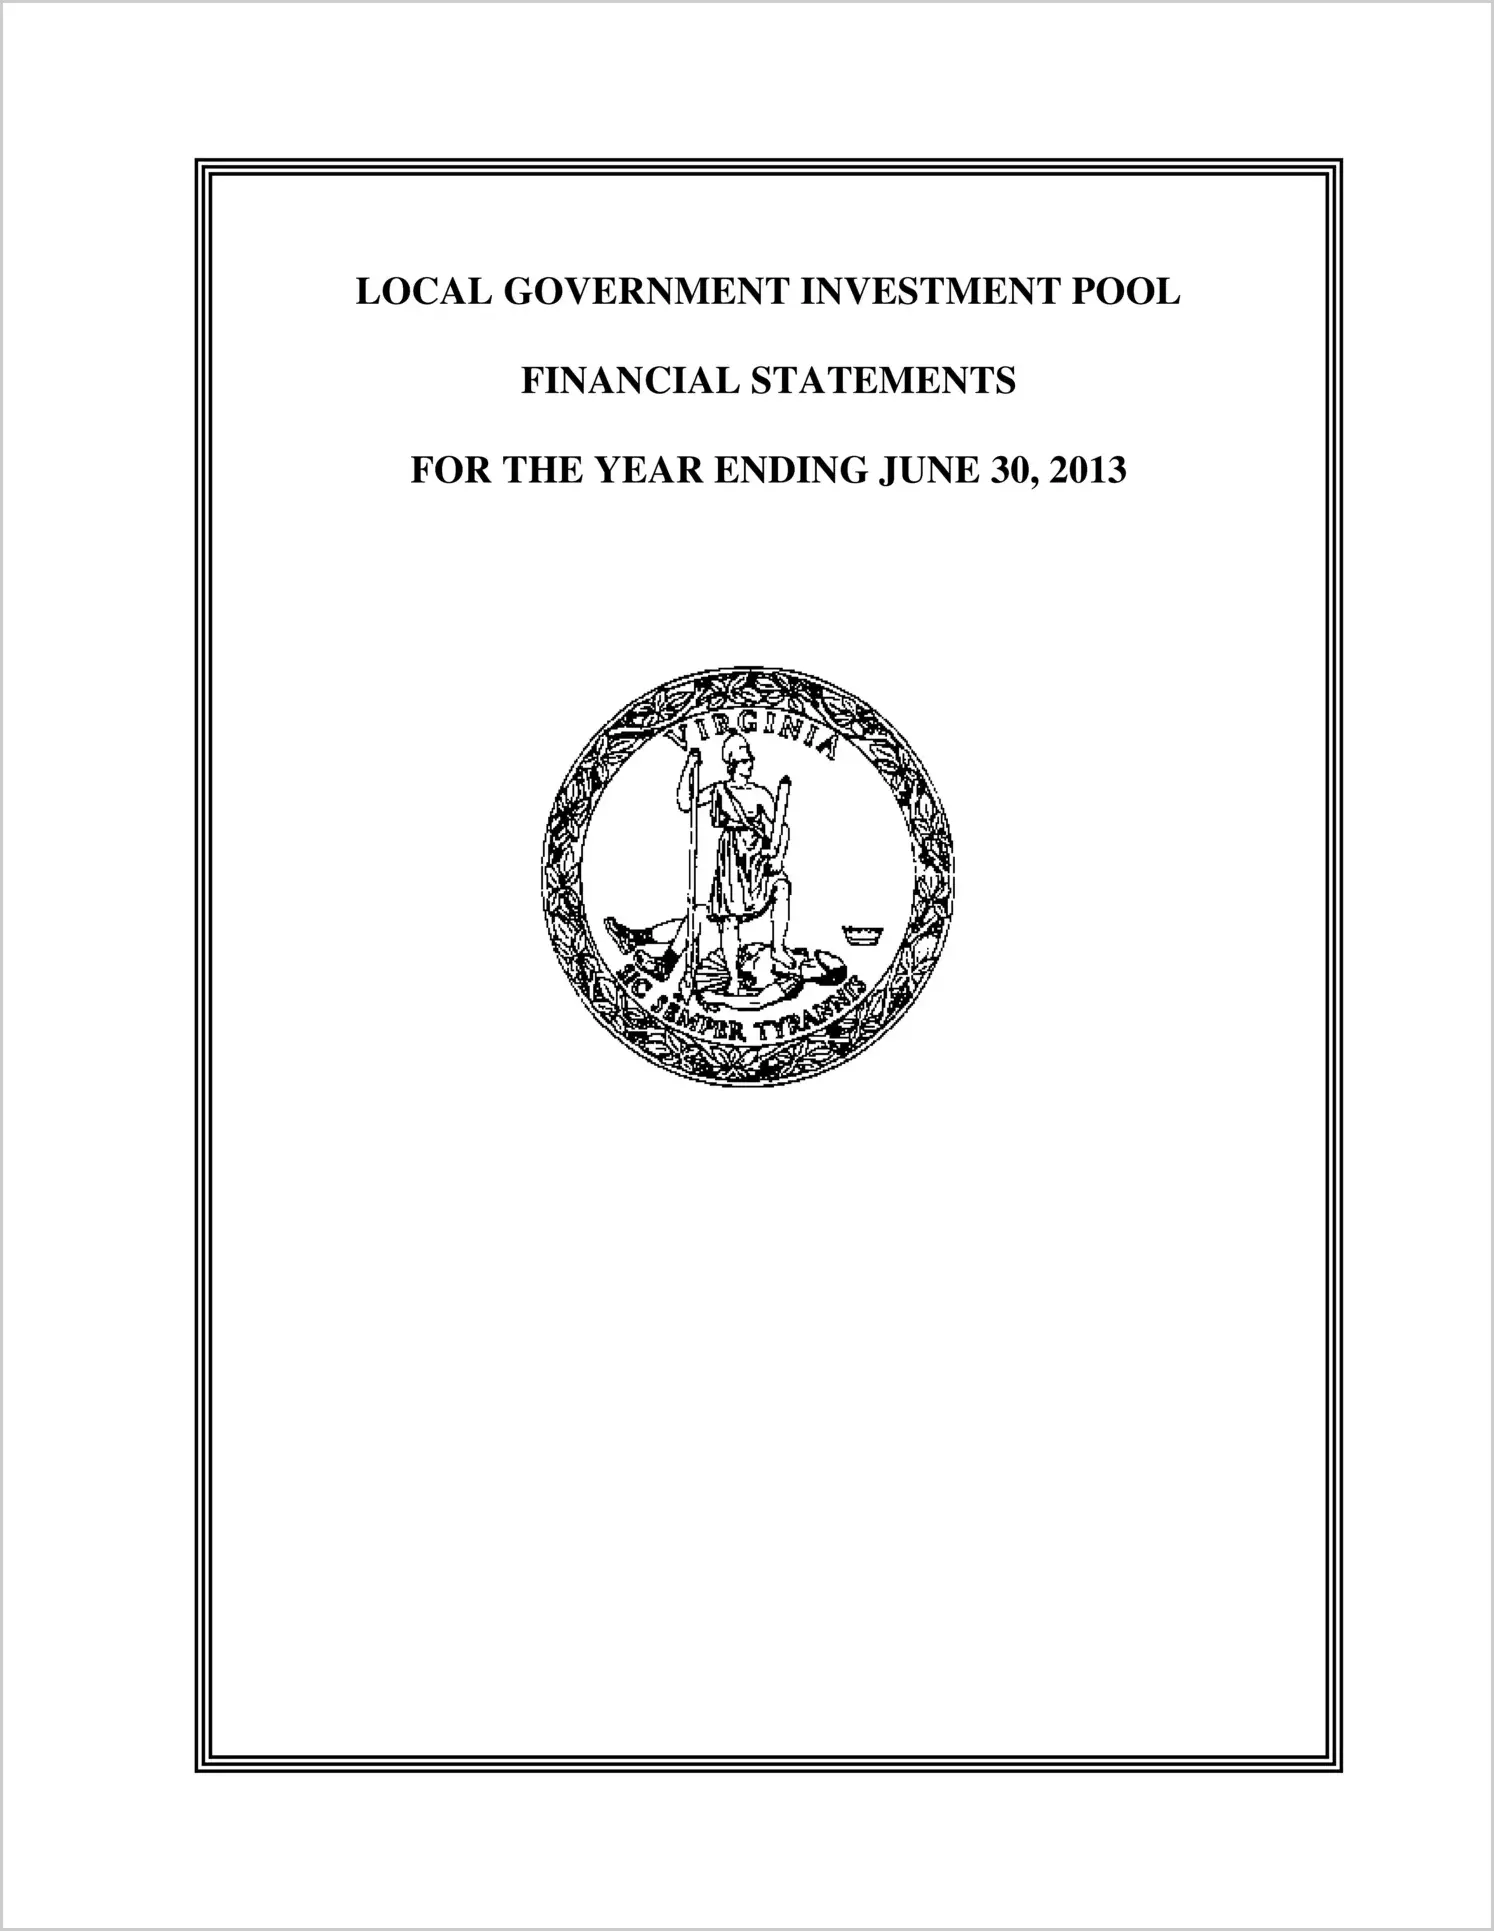 Local Government Investment Pool Financial Statements for the year ended June 30, 2013